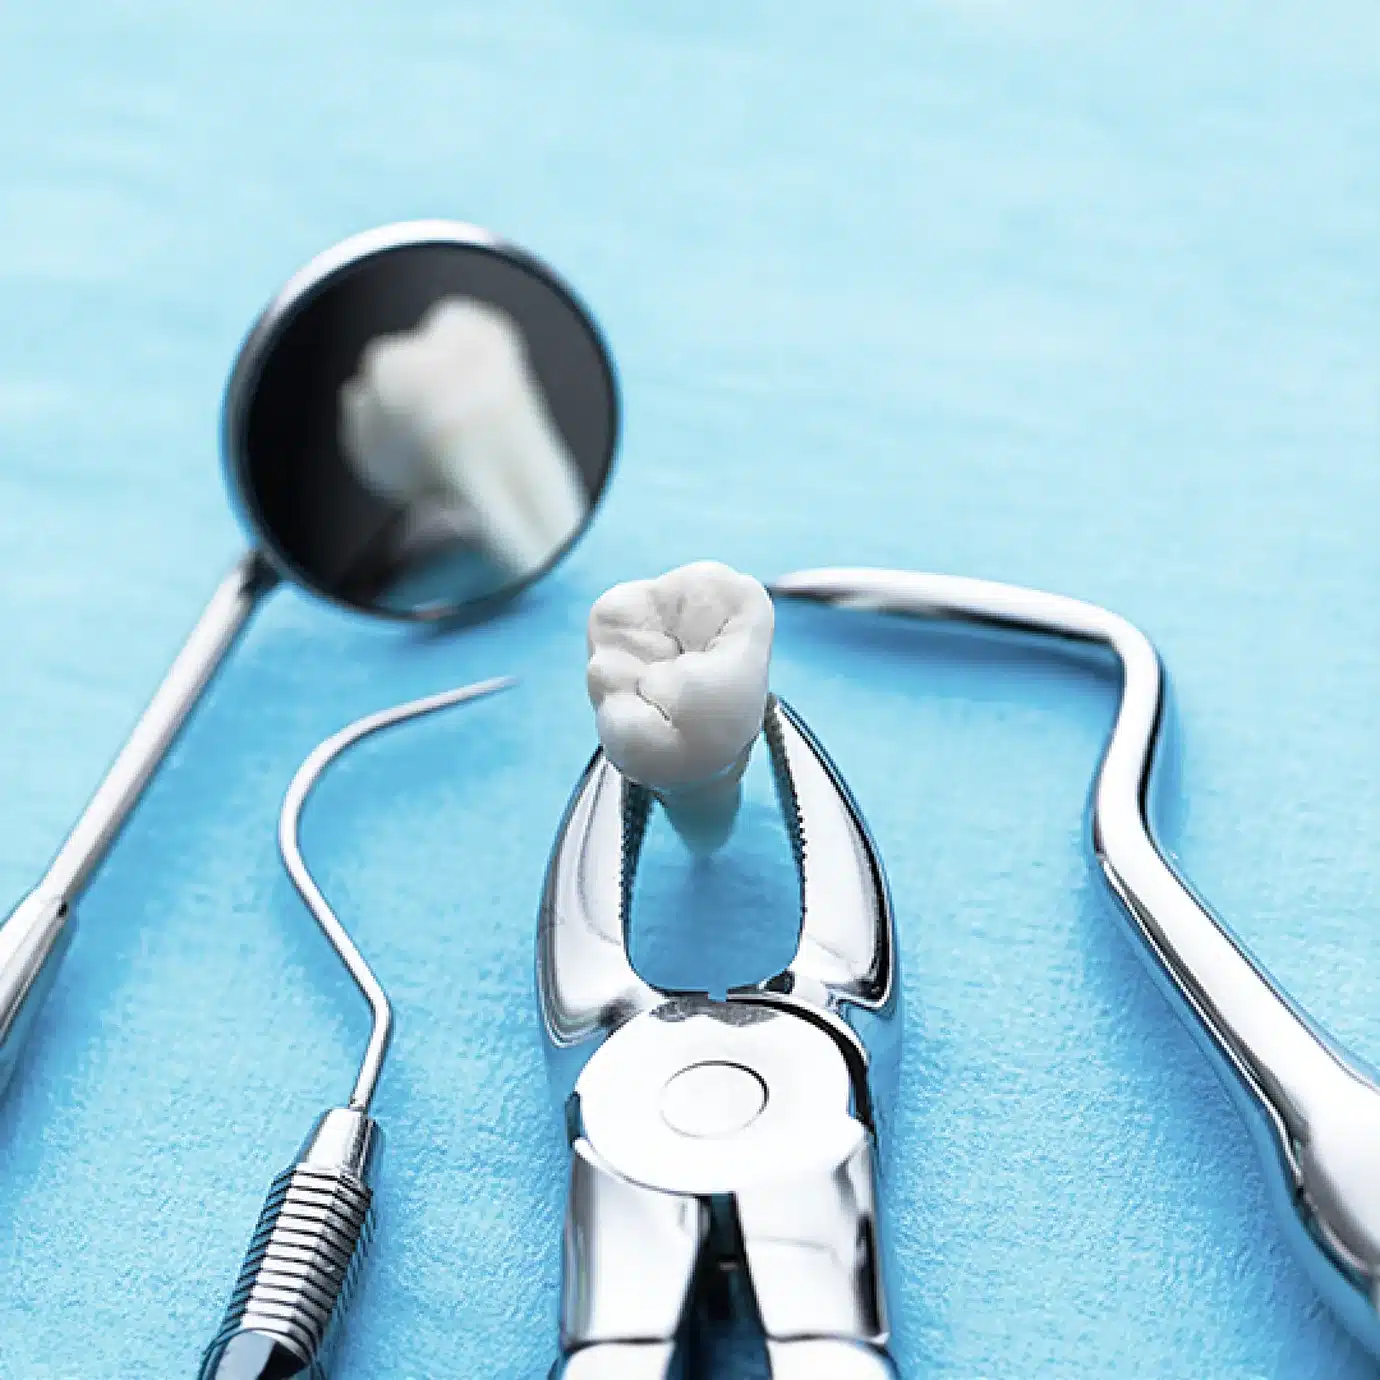 Is there an alternative to wisdom teeth extraction?